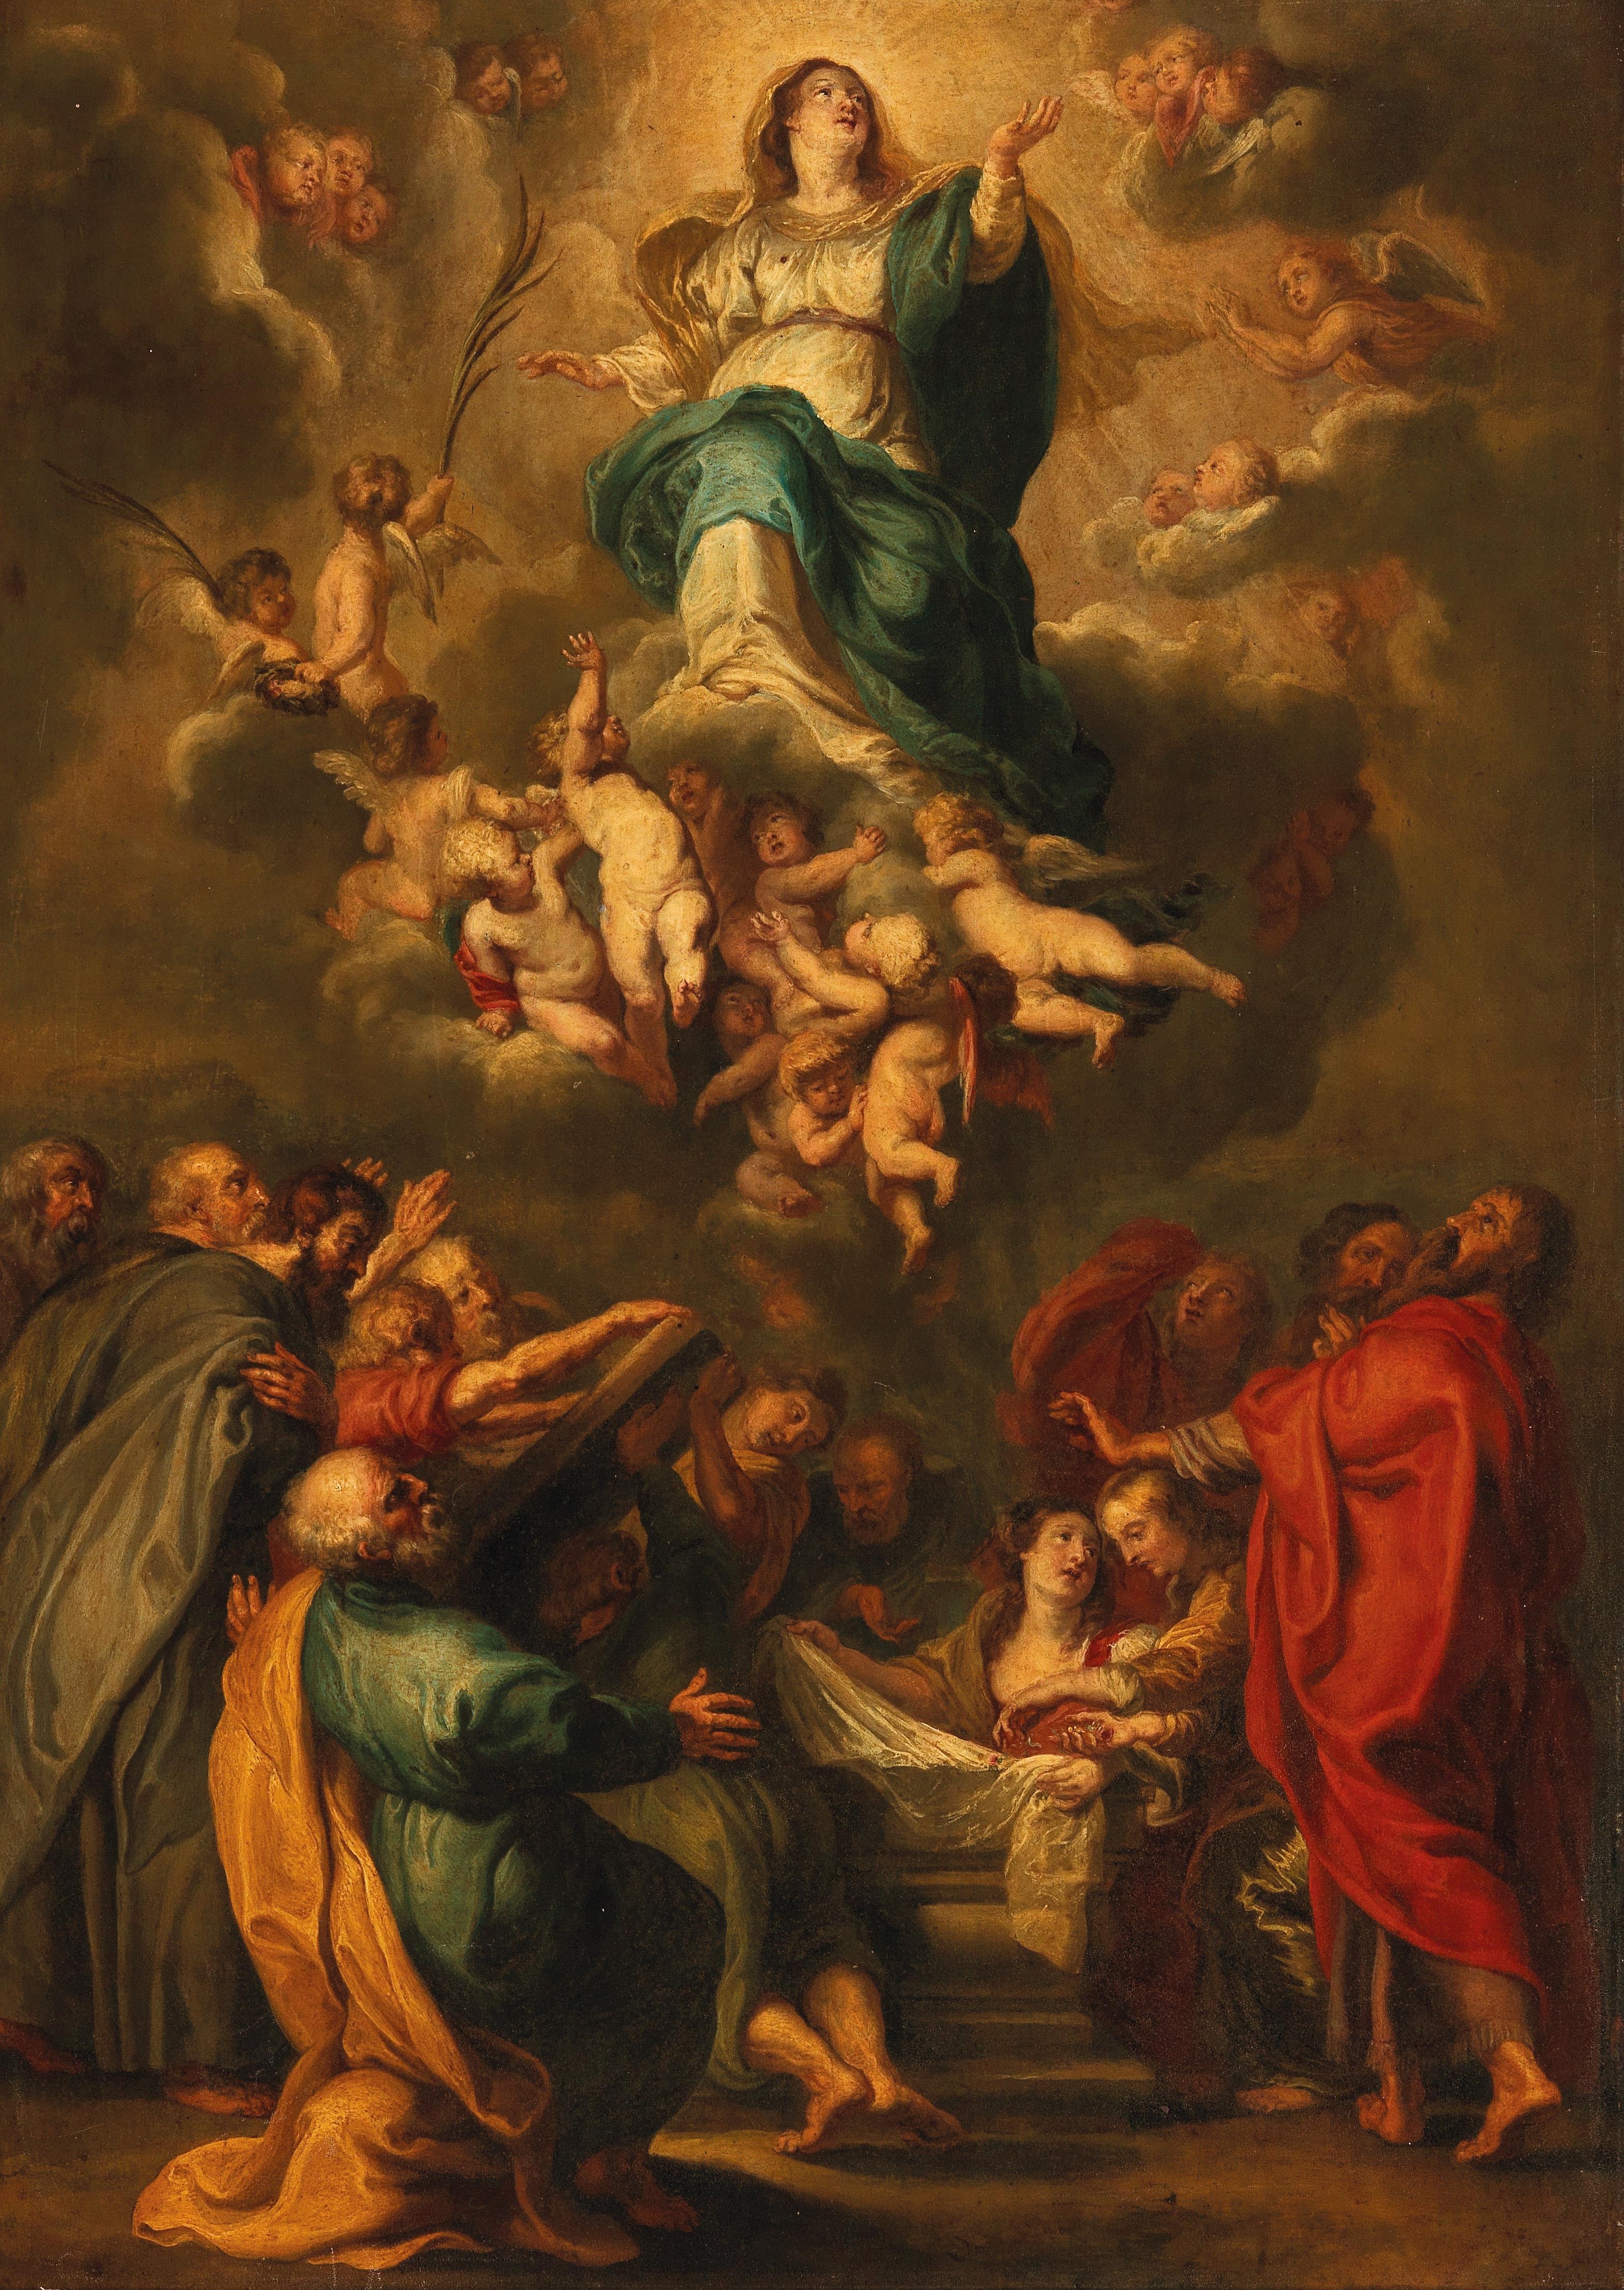 The Assumption of the Virgin, by Peter Paul Rubens